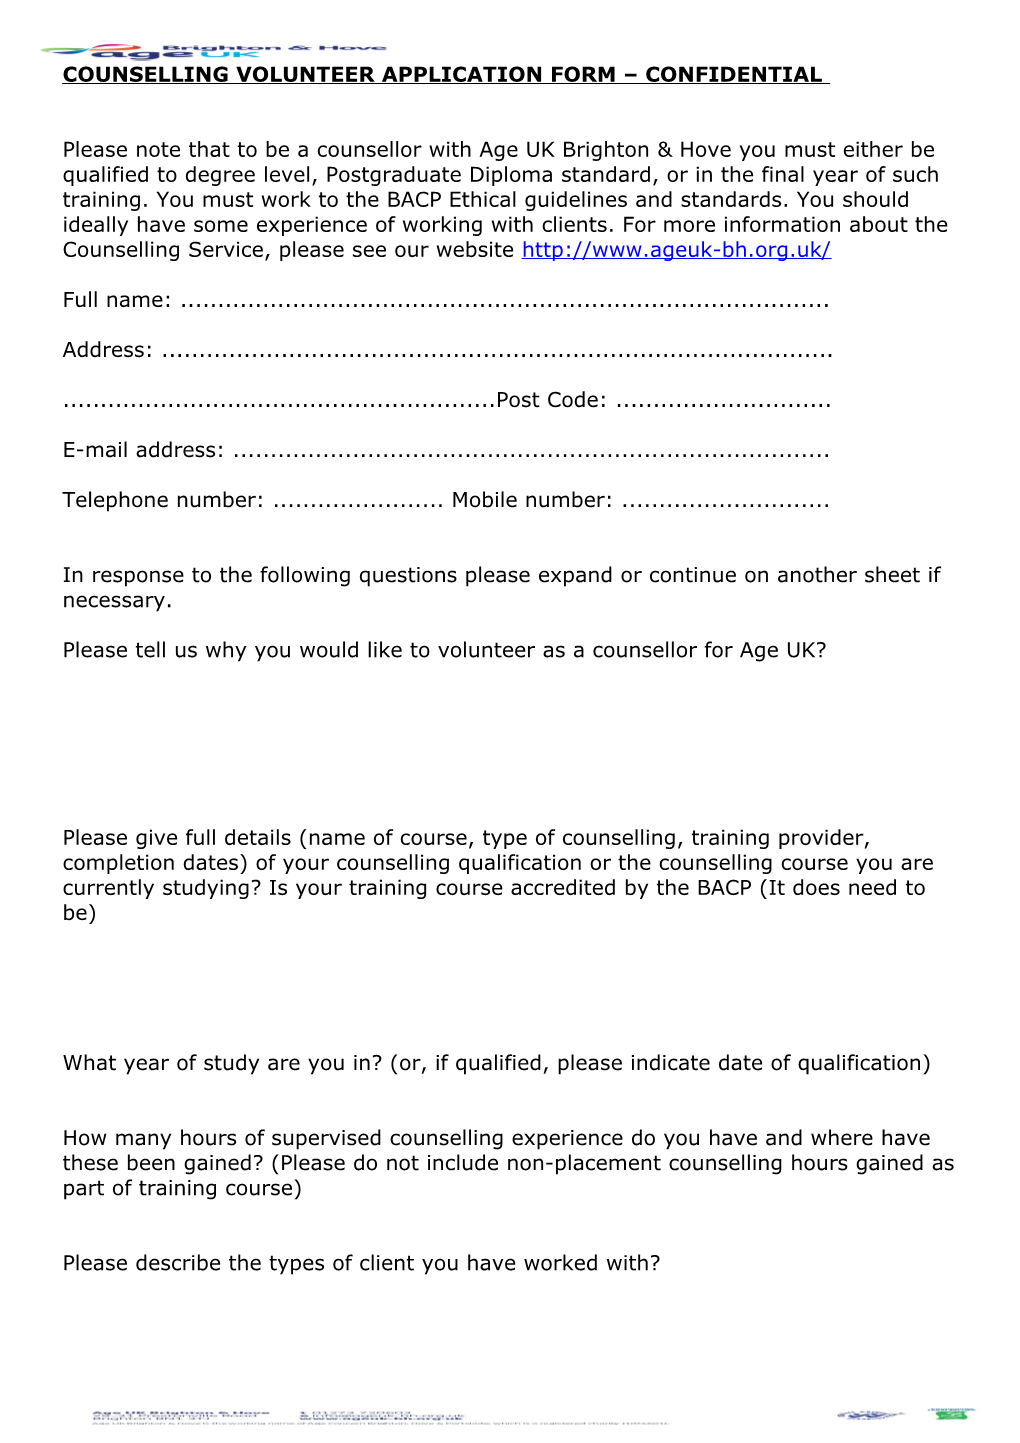 Counselling Volunteer Application Form Confidential